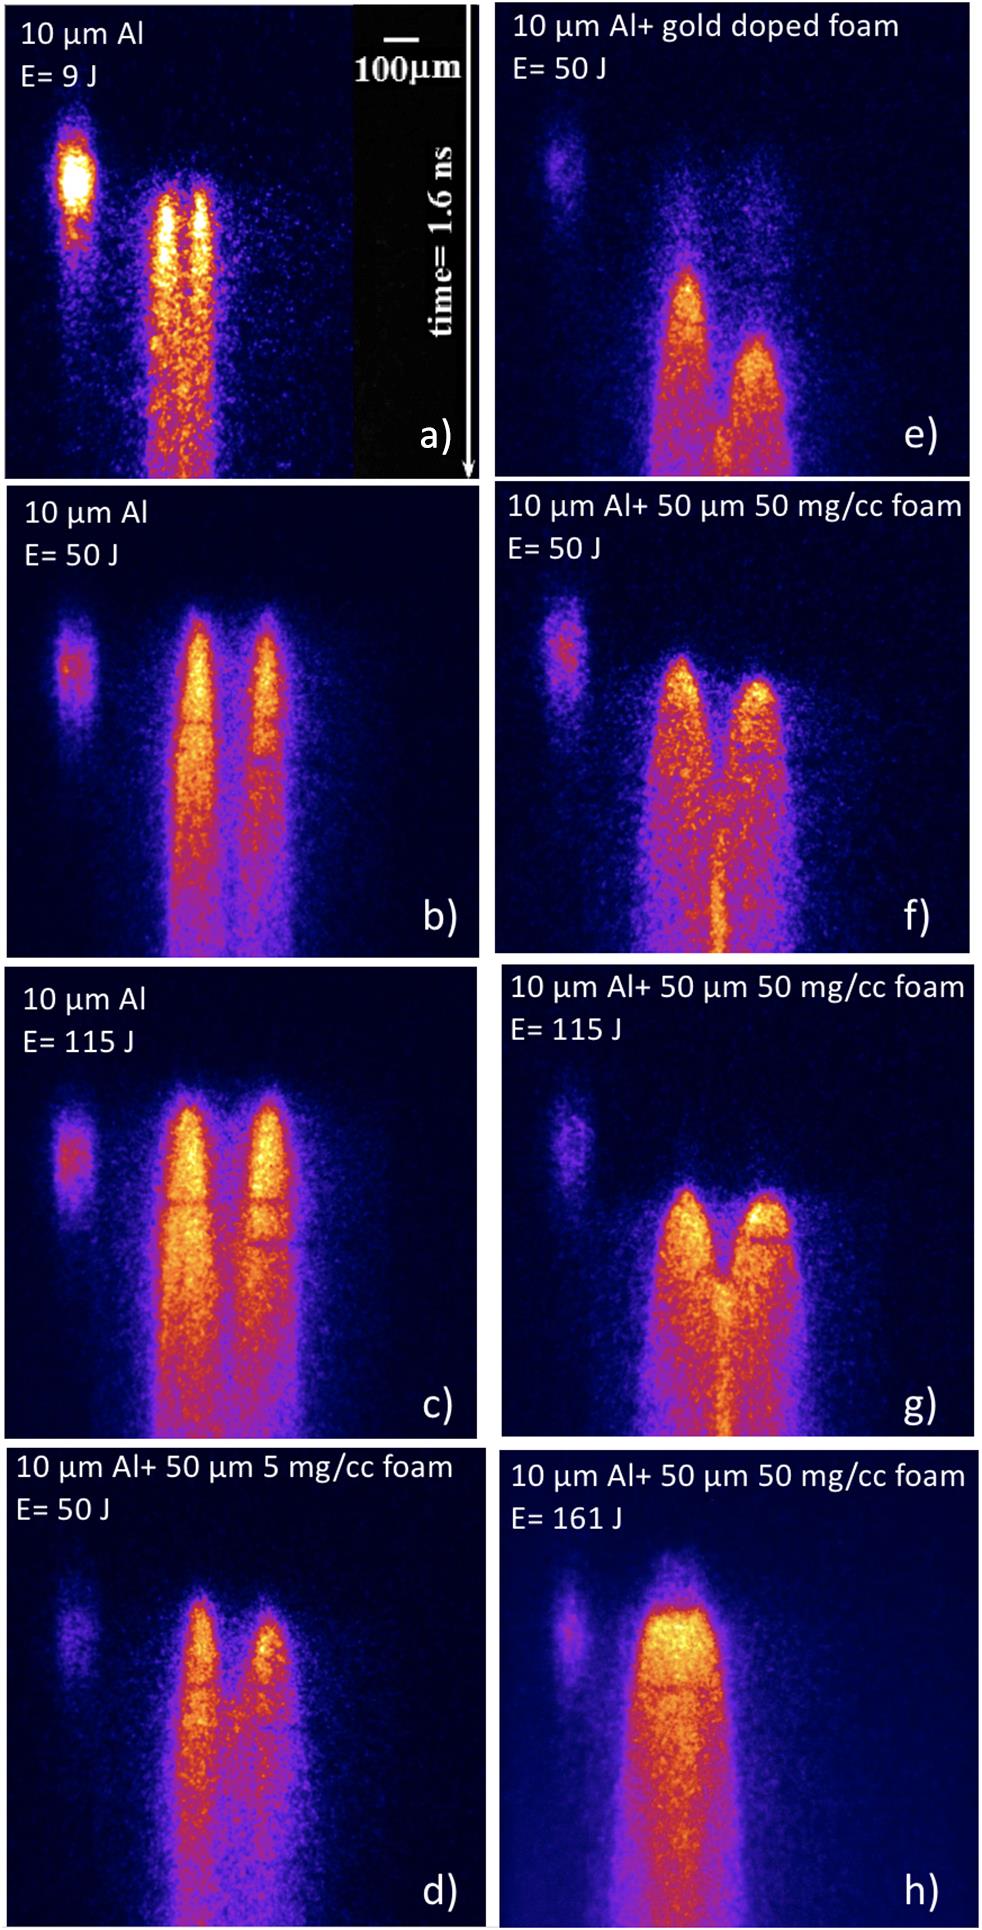 Examples of time-resolved images of target rear-side self-emission obtained with the streak camera: (a) shot 30165, E ∼ 9 J, simple Al target; (b) shot 30142, E ∼ 50 J, simple Al target; (c) shot 30141, E ∼ 115 J, simple Al target; (d) shot 30150, E ∼ 50 J, Al + foam 5 g/cm3; (e) shot 30151, E ∼ 50 J, Al + foam 50 mg/cm3 with embedded Au nanoparticles; (f) shot 30147, E ∼ 50 J, Al + foam 50 mg/cm3; (g) shot 30148, E ∼ 115 J, Al + foam 50 mg/cm3; (h) shot 30167, E ∼ 161 J, Al + foam 50 mg/cm3. For the case of (a) and (h), the separation between the two spots was 100 μm instead of the nominal 200 μm.